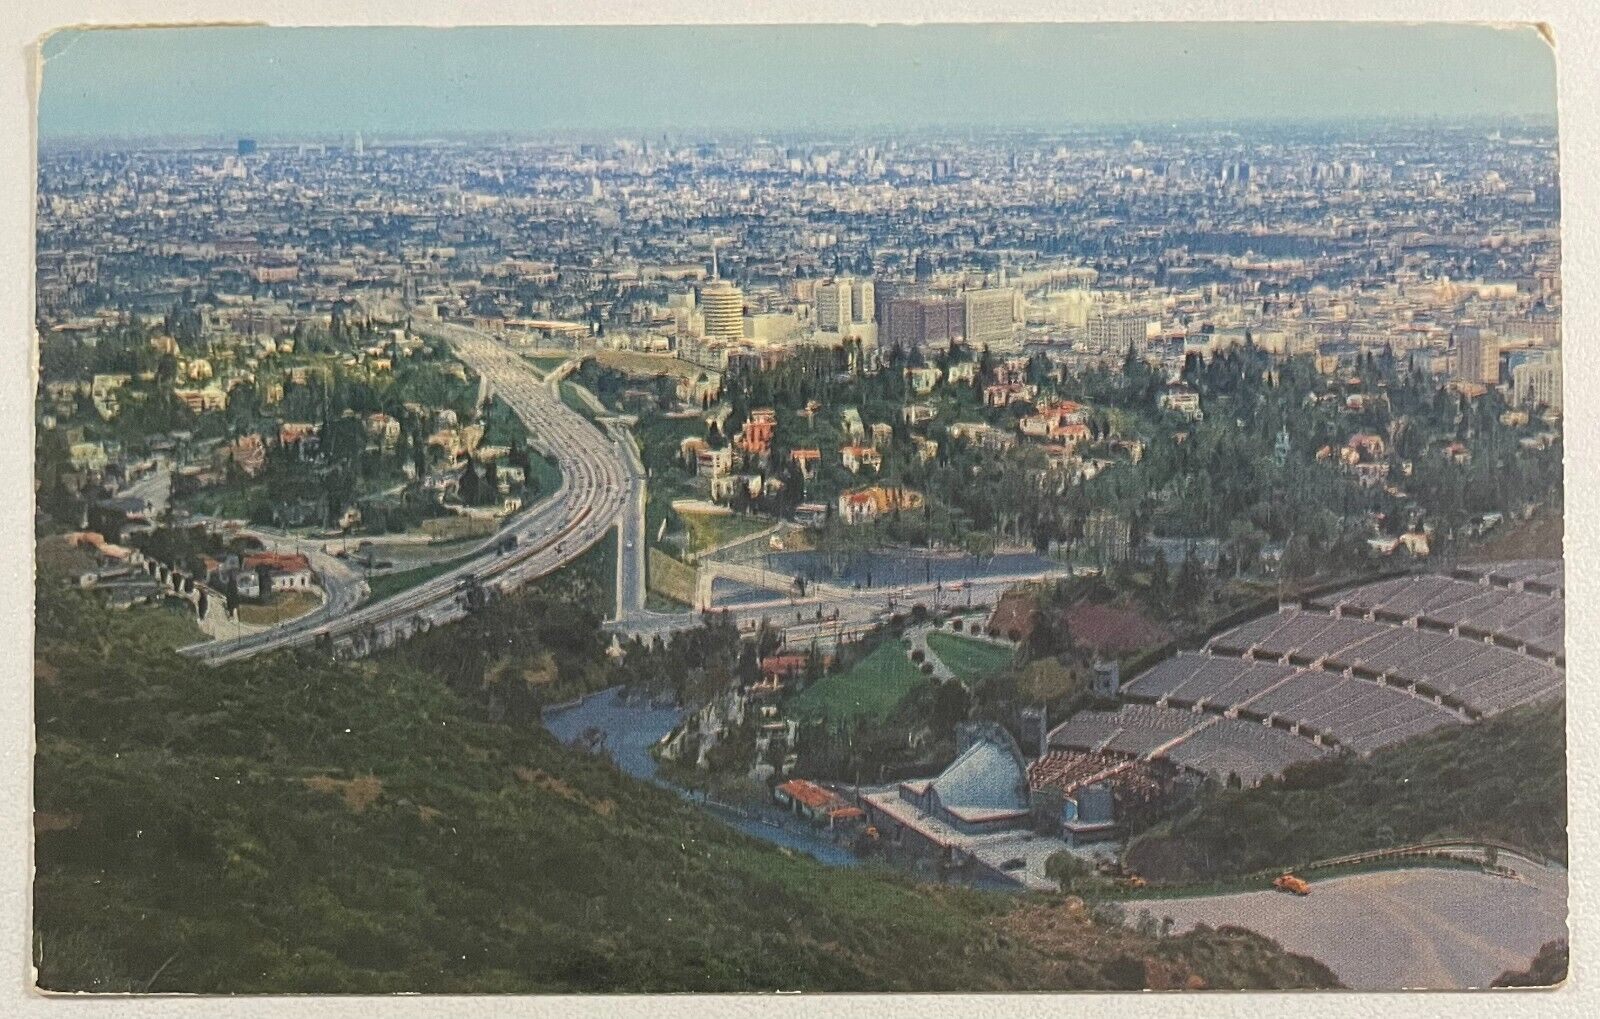 Los Angeles, Hollywood, CA/View From Mulholland Dr./Vintage Postcard PM1958